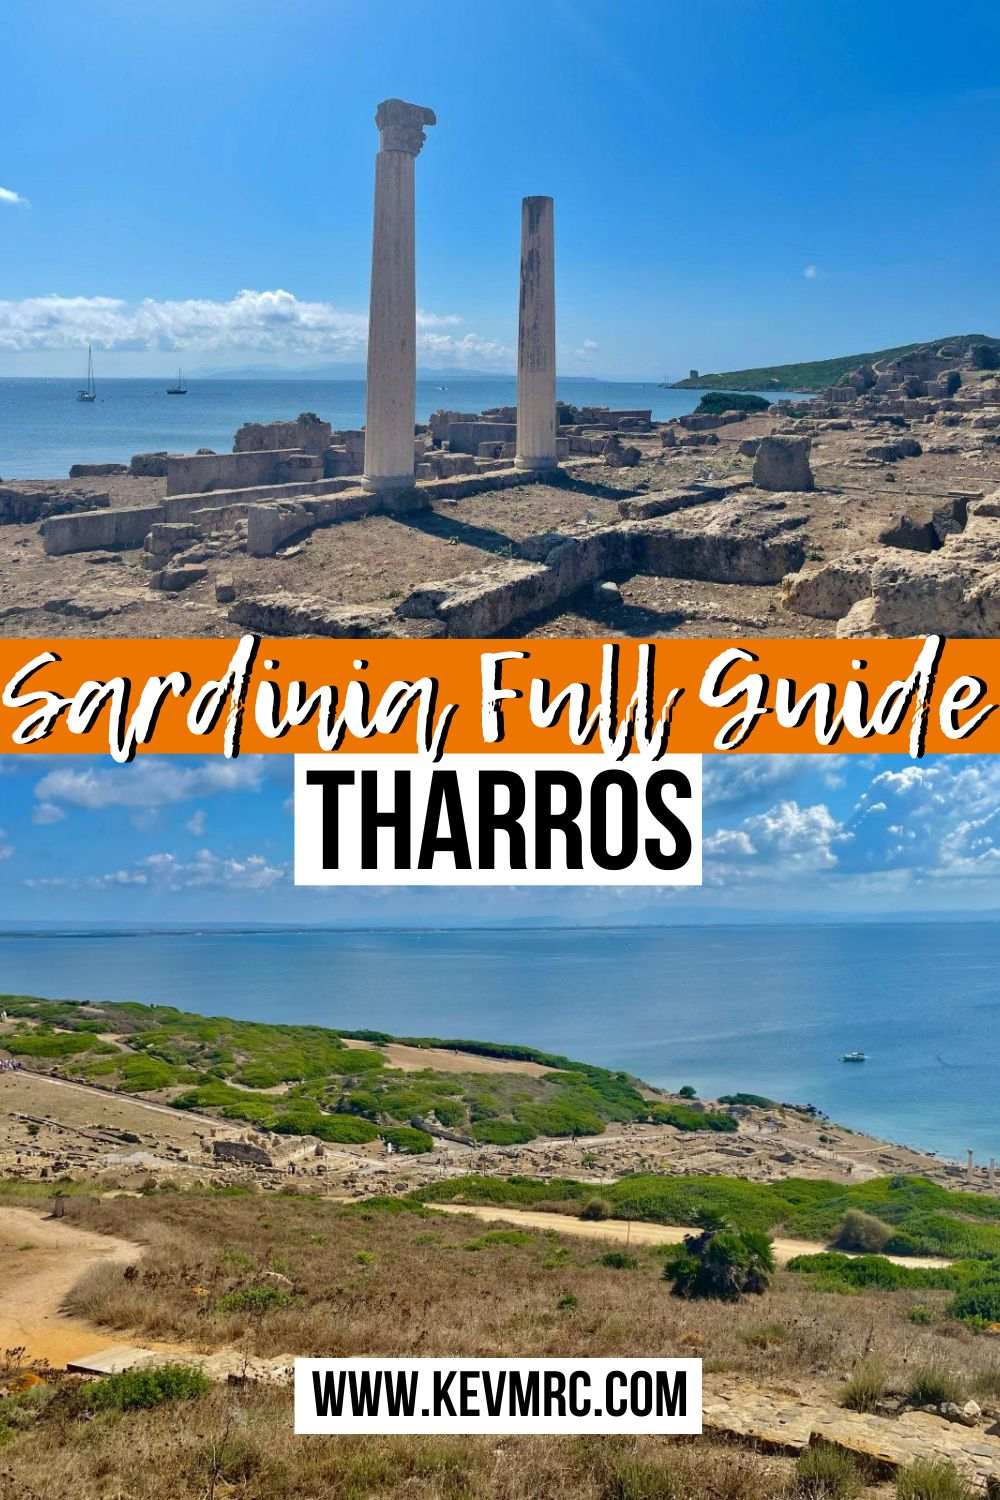 Going to visit Tharros in Sardinia Italy soon? Find in this guide all the info, details and tips to visit Tharros properly. tharros sardegna | tharros sardinia | sardinia travel #sardinia